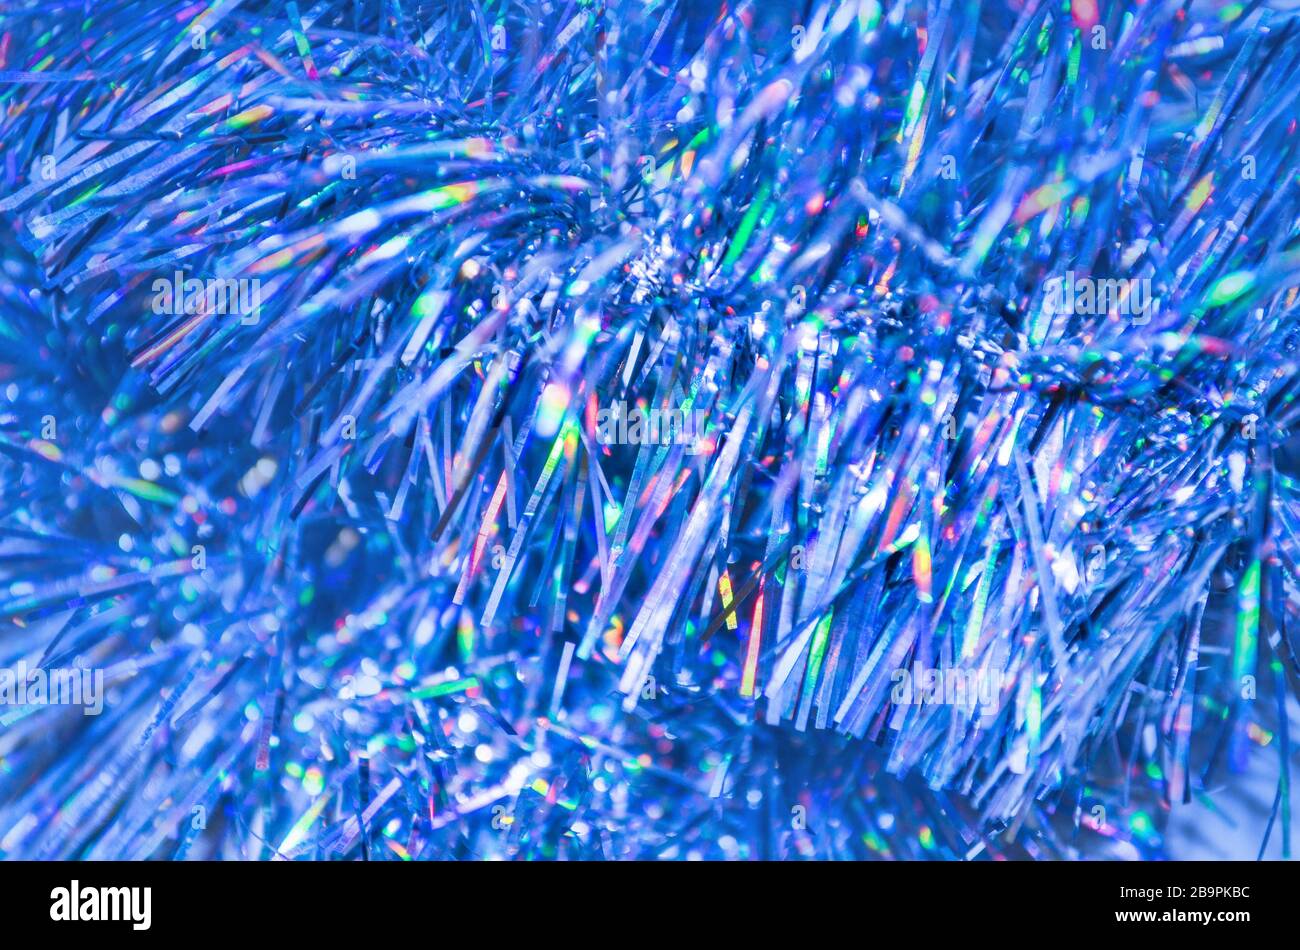 Christmas blue garland. Party celebration texture. Colorful  blue Christmas tinsel Stock Photo